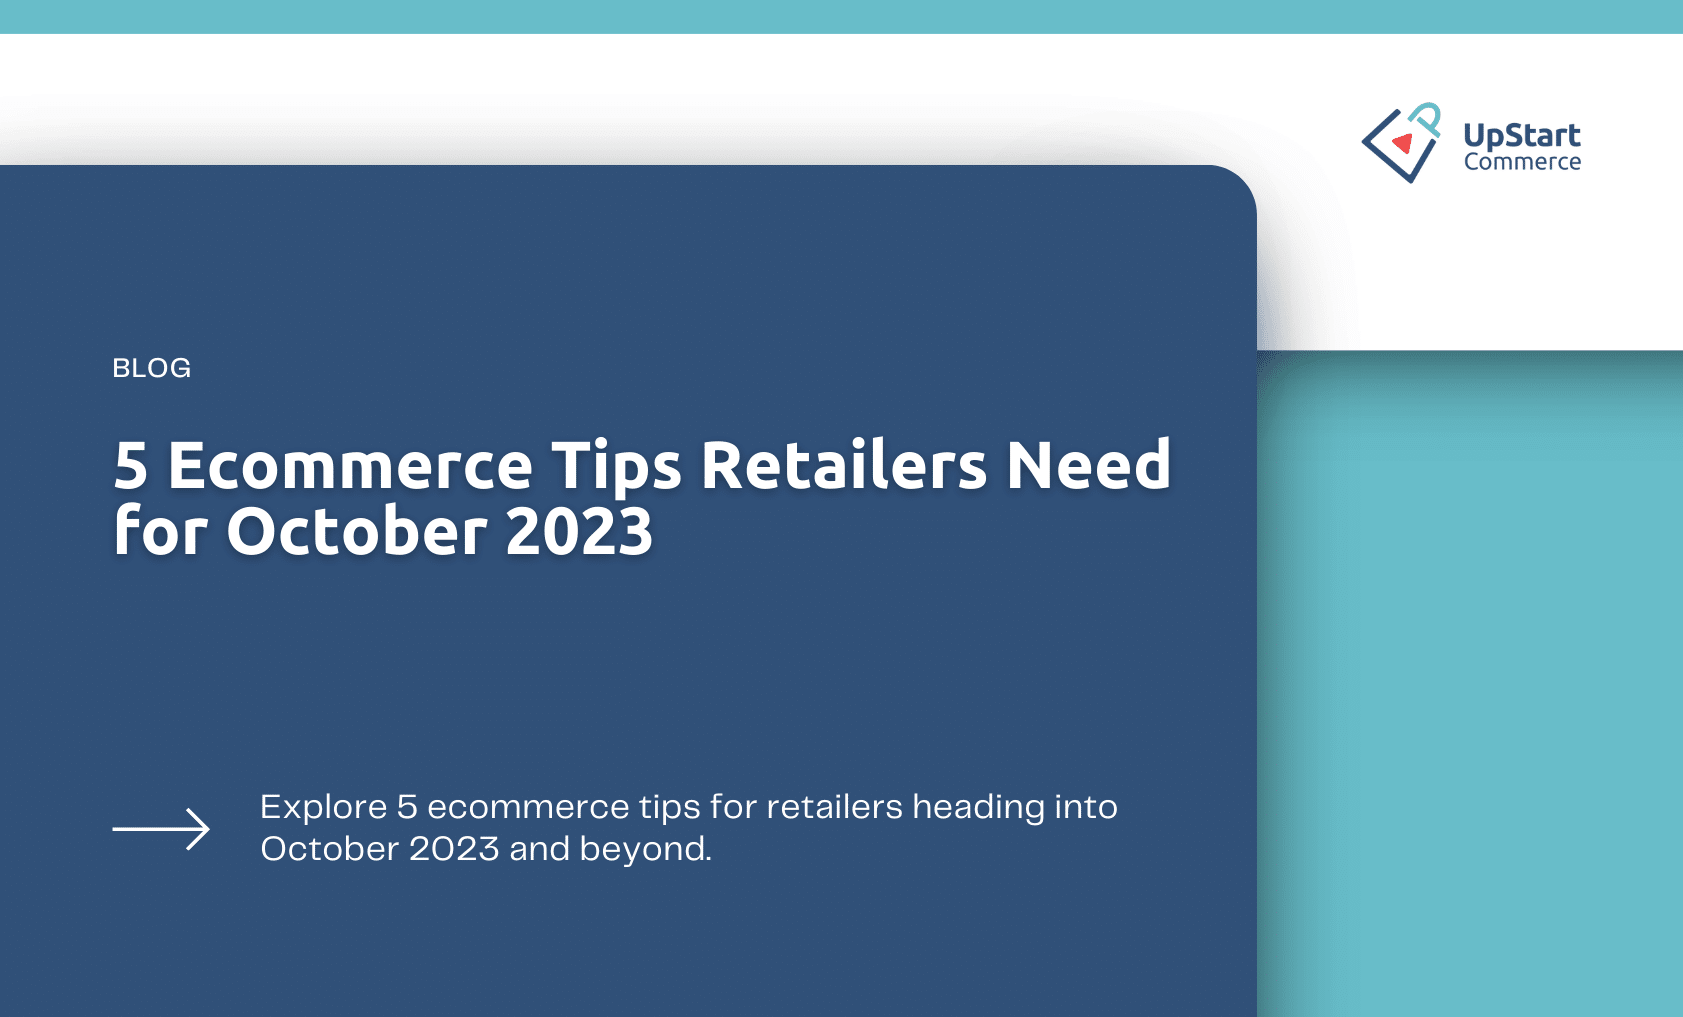 5 Ecommerce Tips Retailers Need for October 2023